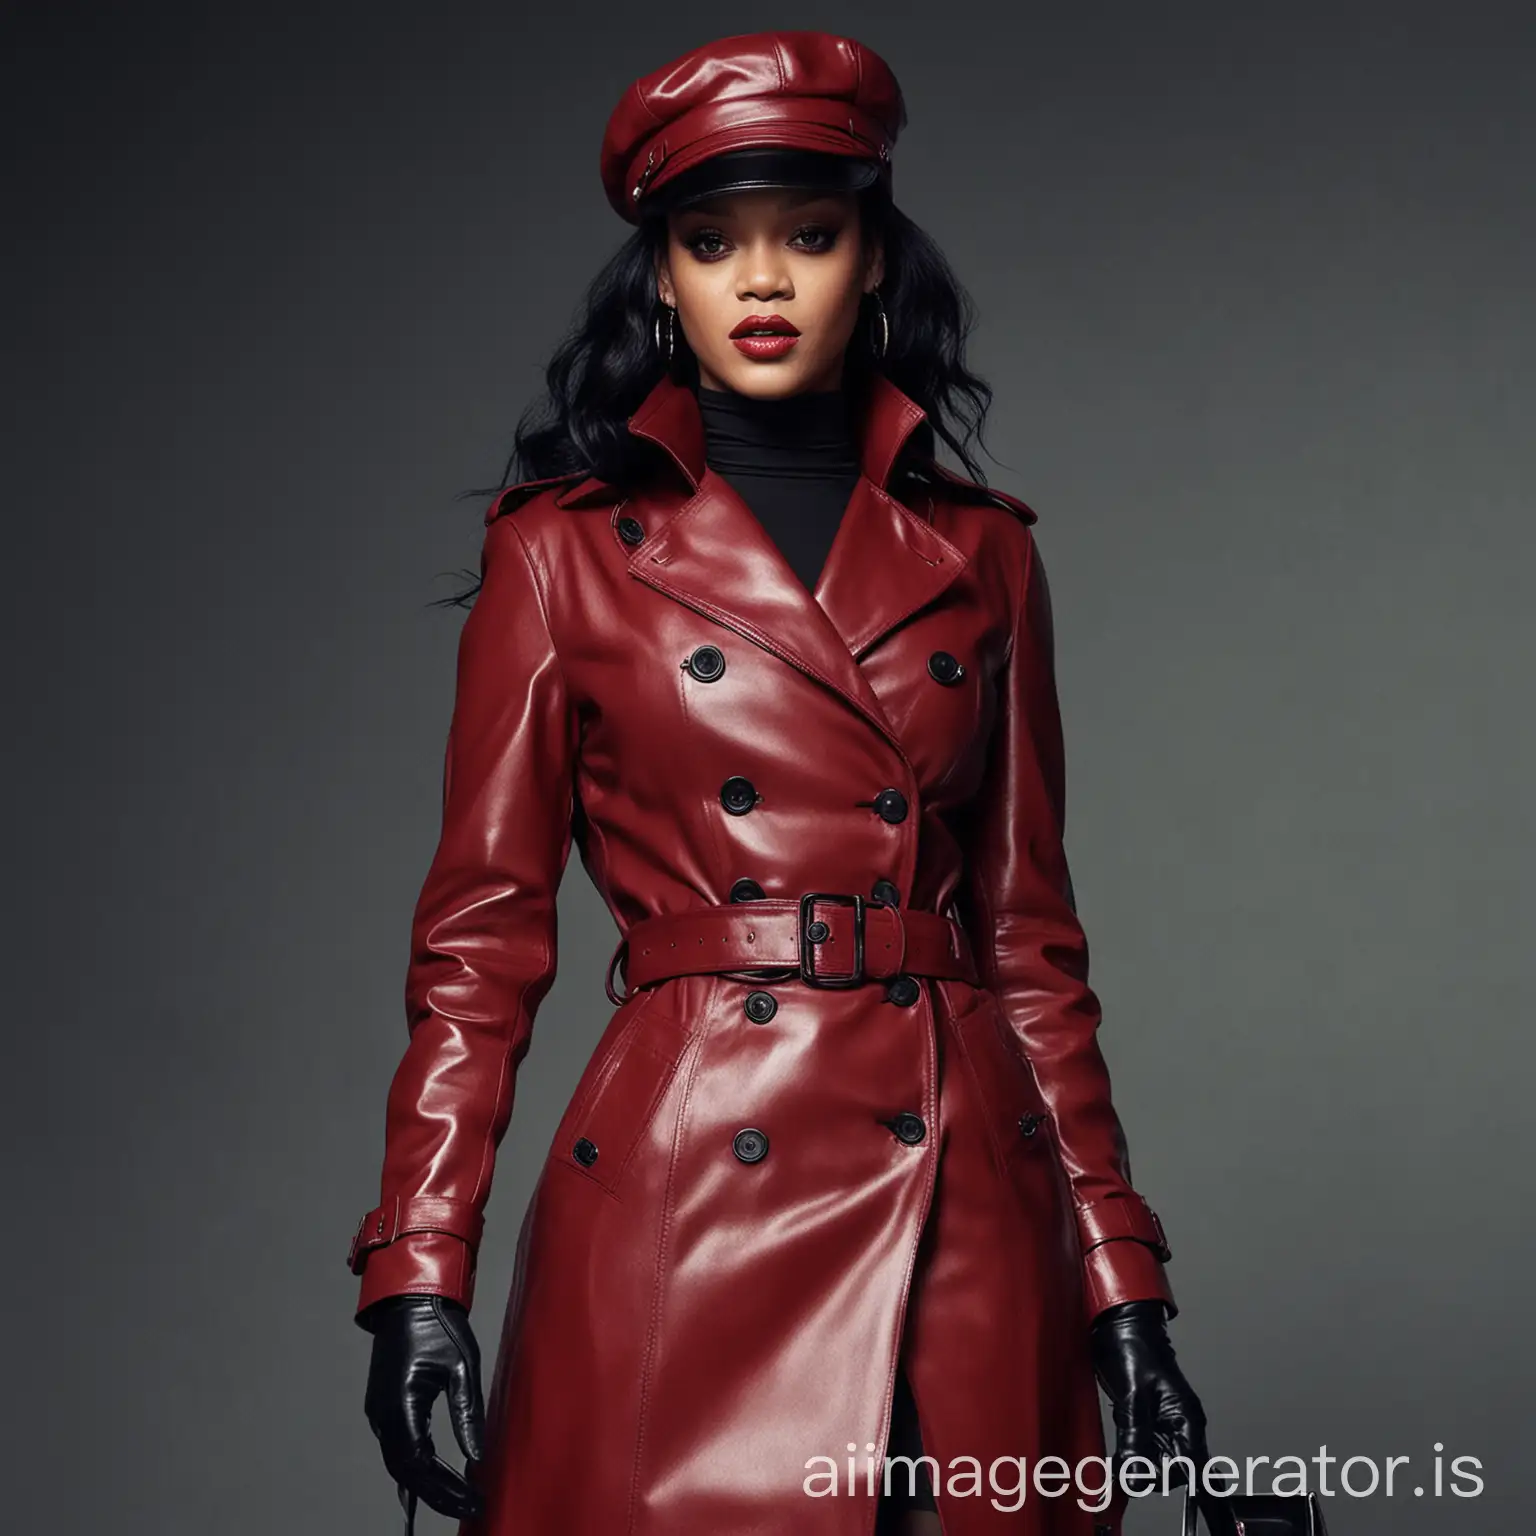 Rihanna as dominatrix in dark red leather trench coat, black leather gloves, black leather masters cap